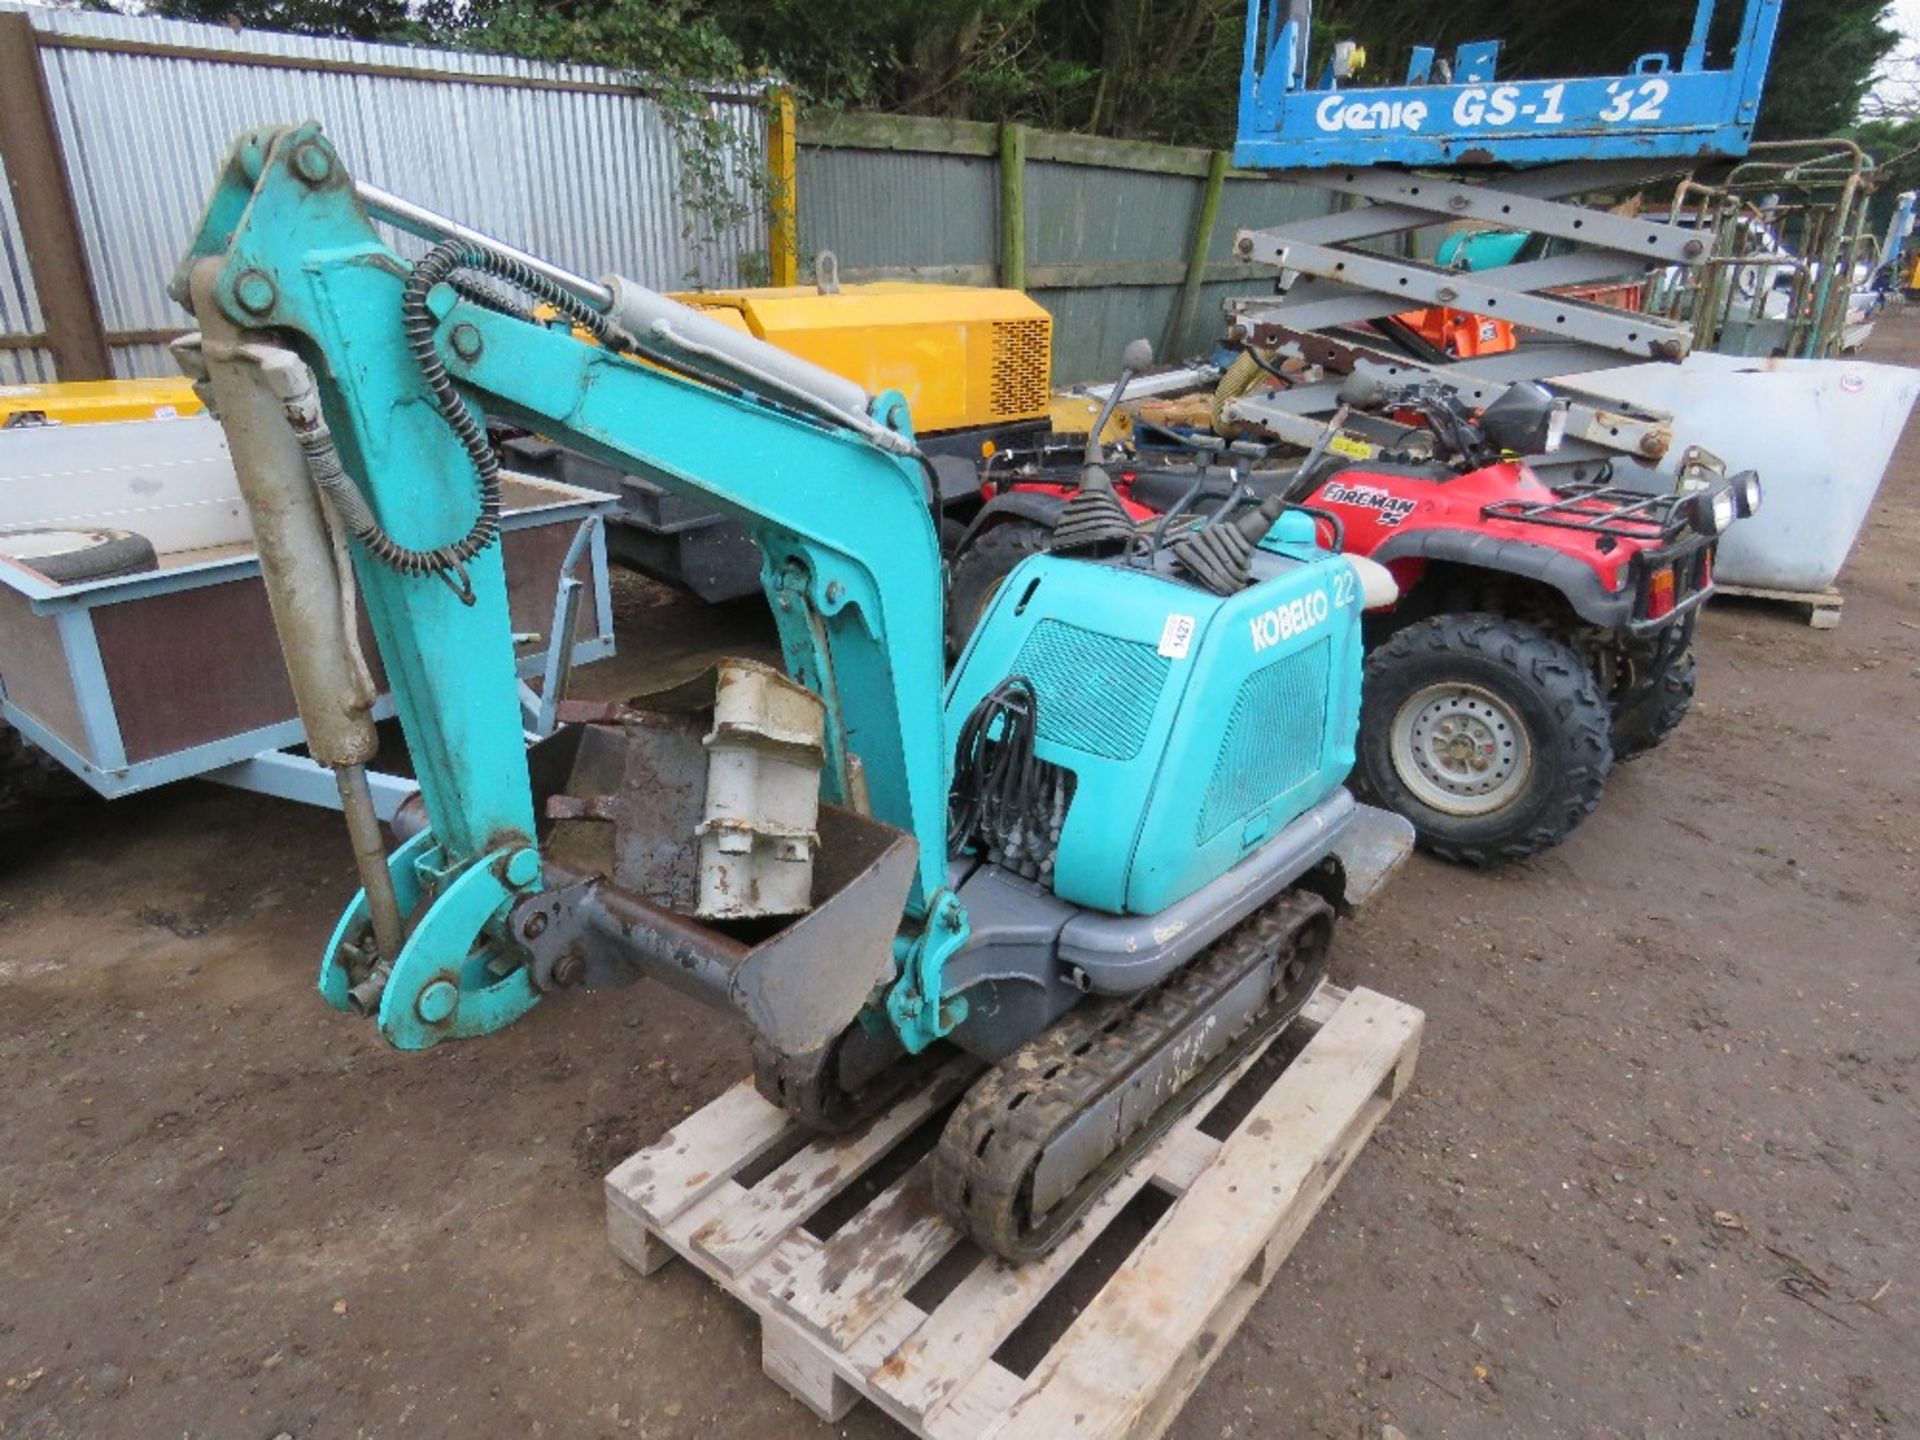 KOBELCO 22 MICRO EXCAVATOR WITH 2 X BUCKETS. PETROL ENGINED, 1049 REC HOURS. SN:FS-01494. THIS LOT I - Image 2 of 8